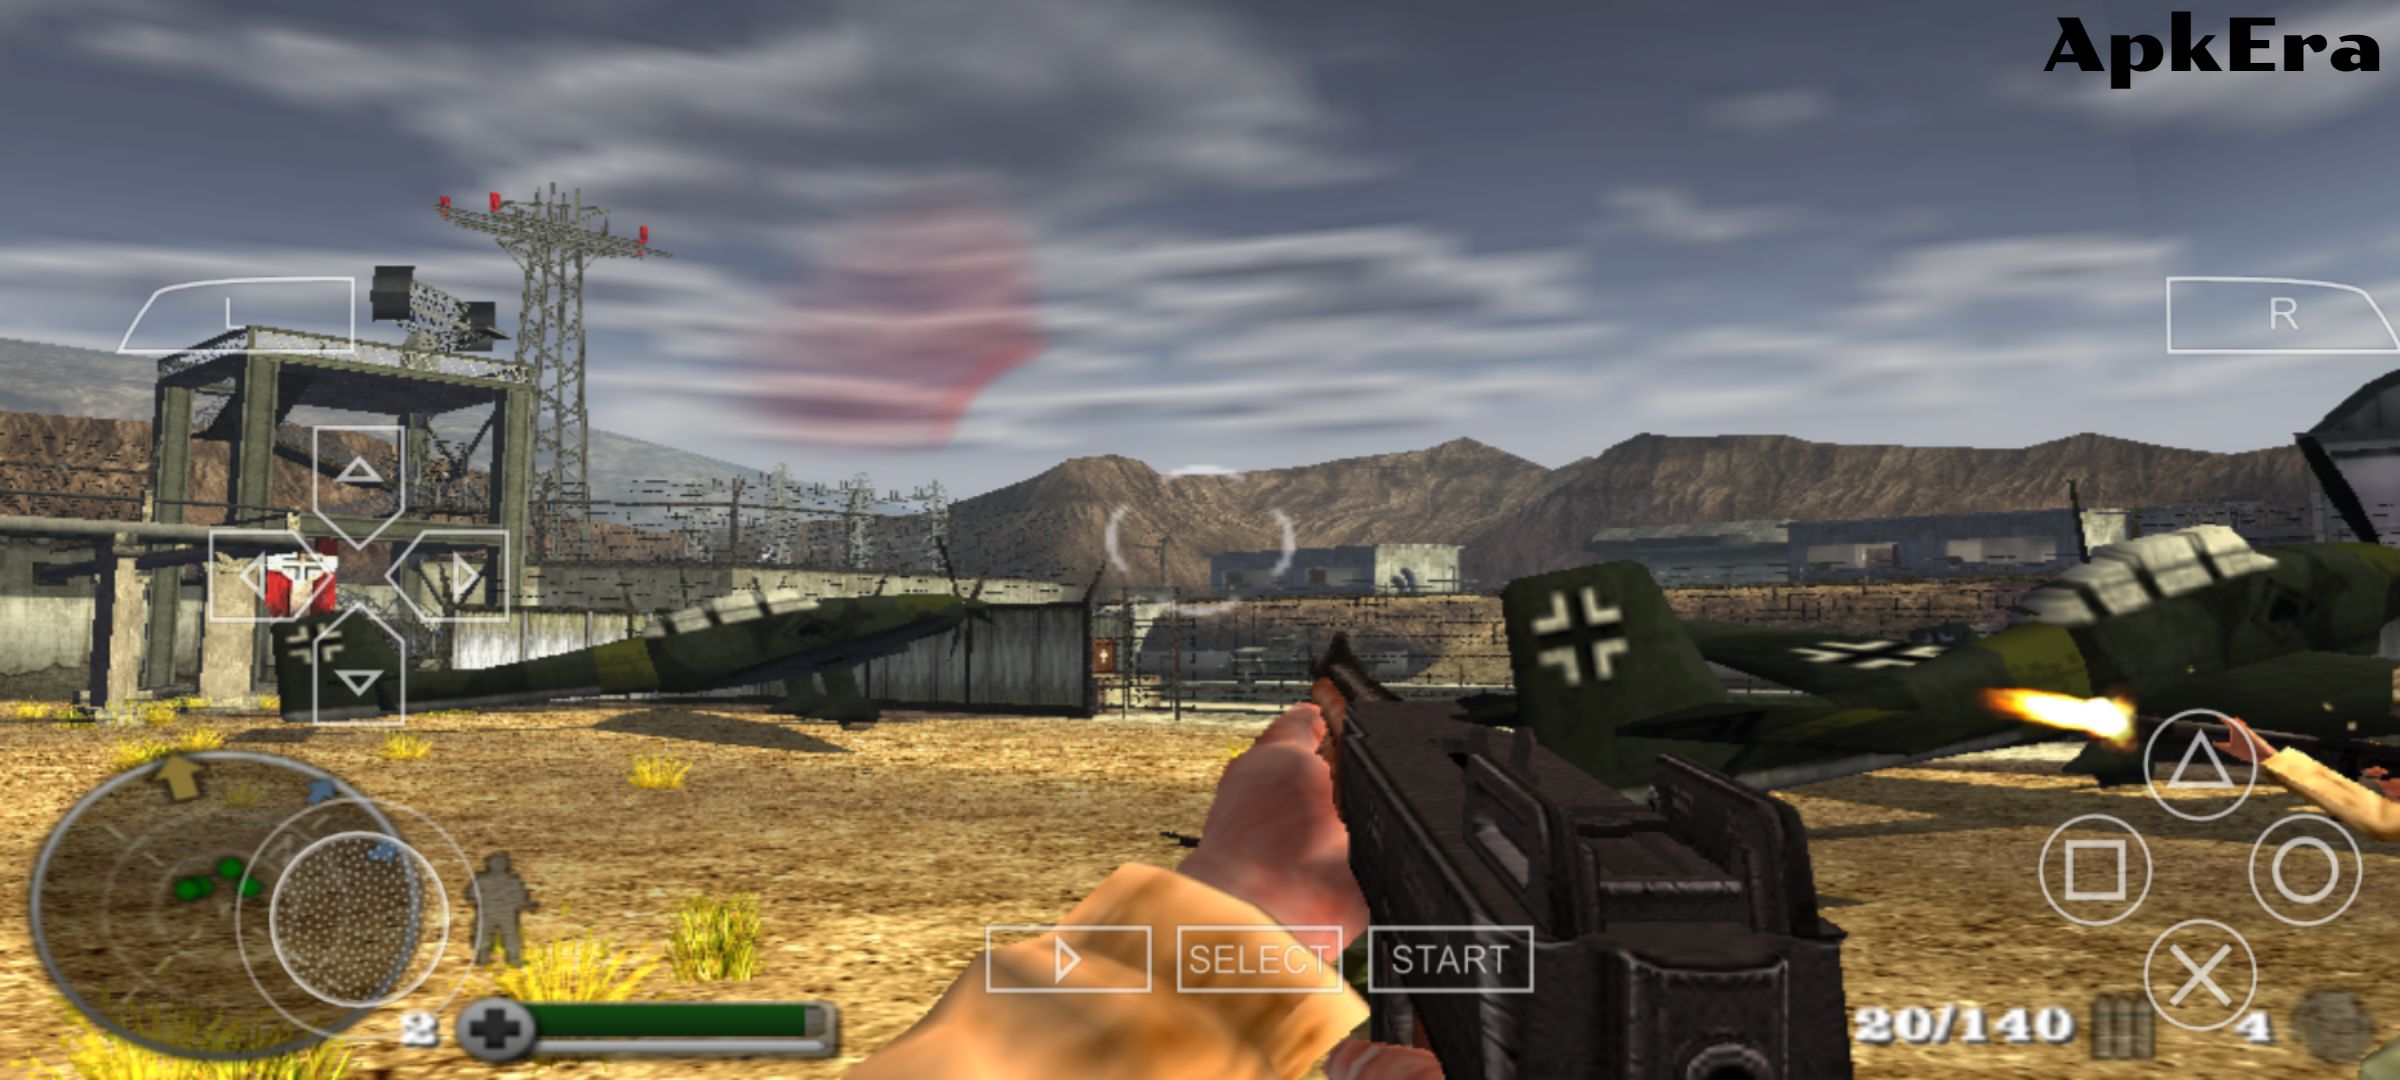 Top 12 Best PPSSPP FPS Games for Android